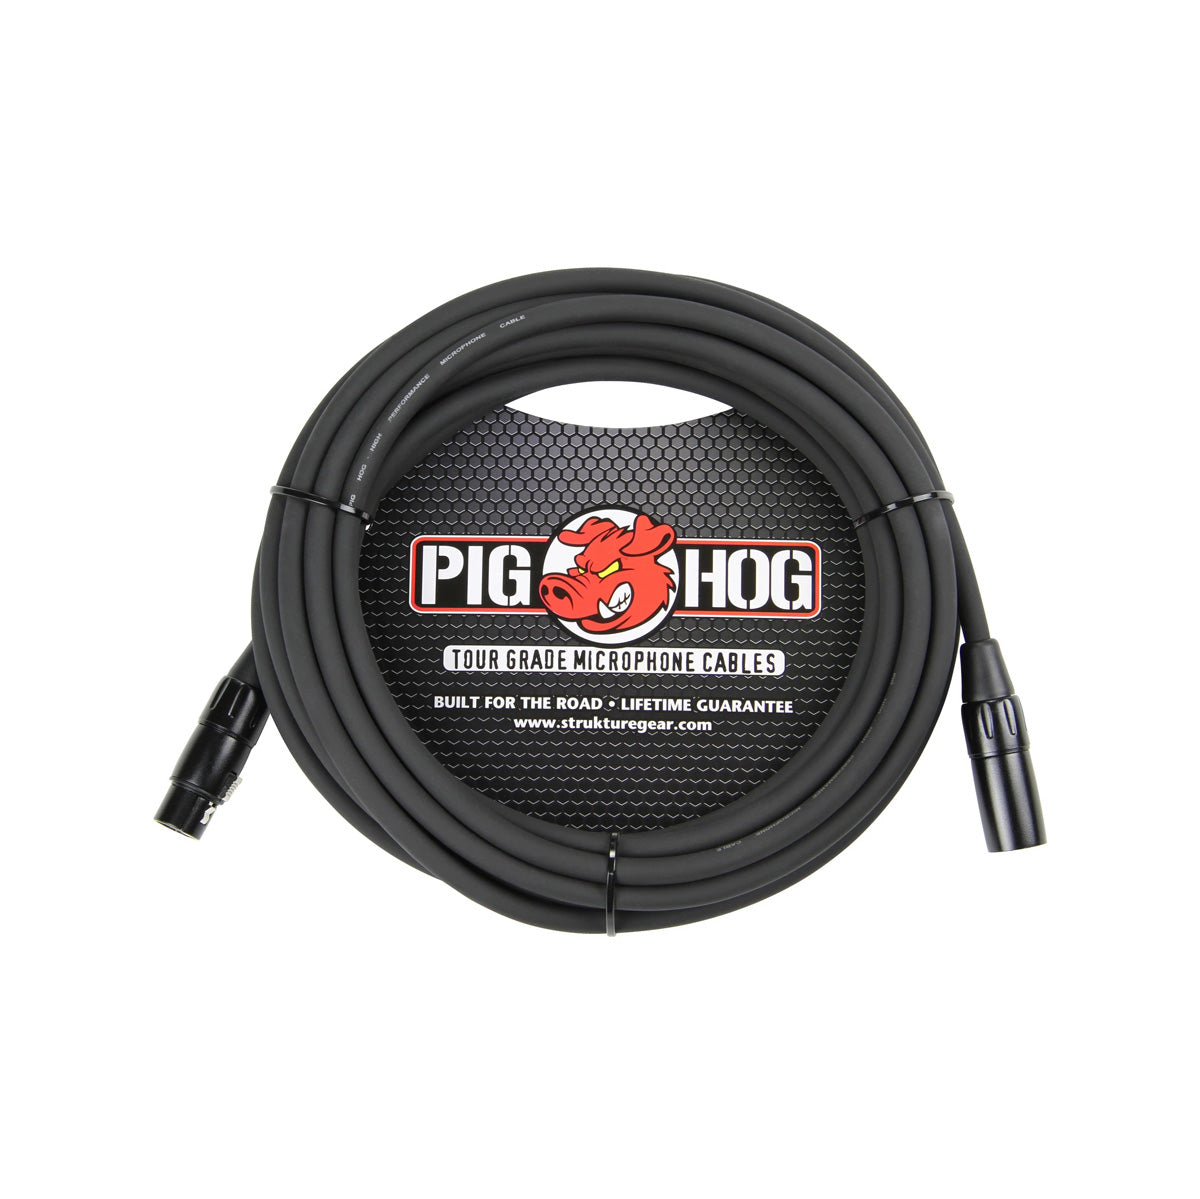 Pig Hog PHM30 8mm Microphone XLR Cable - 30 ft.